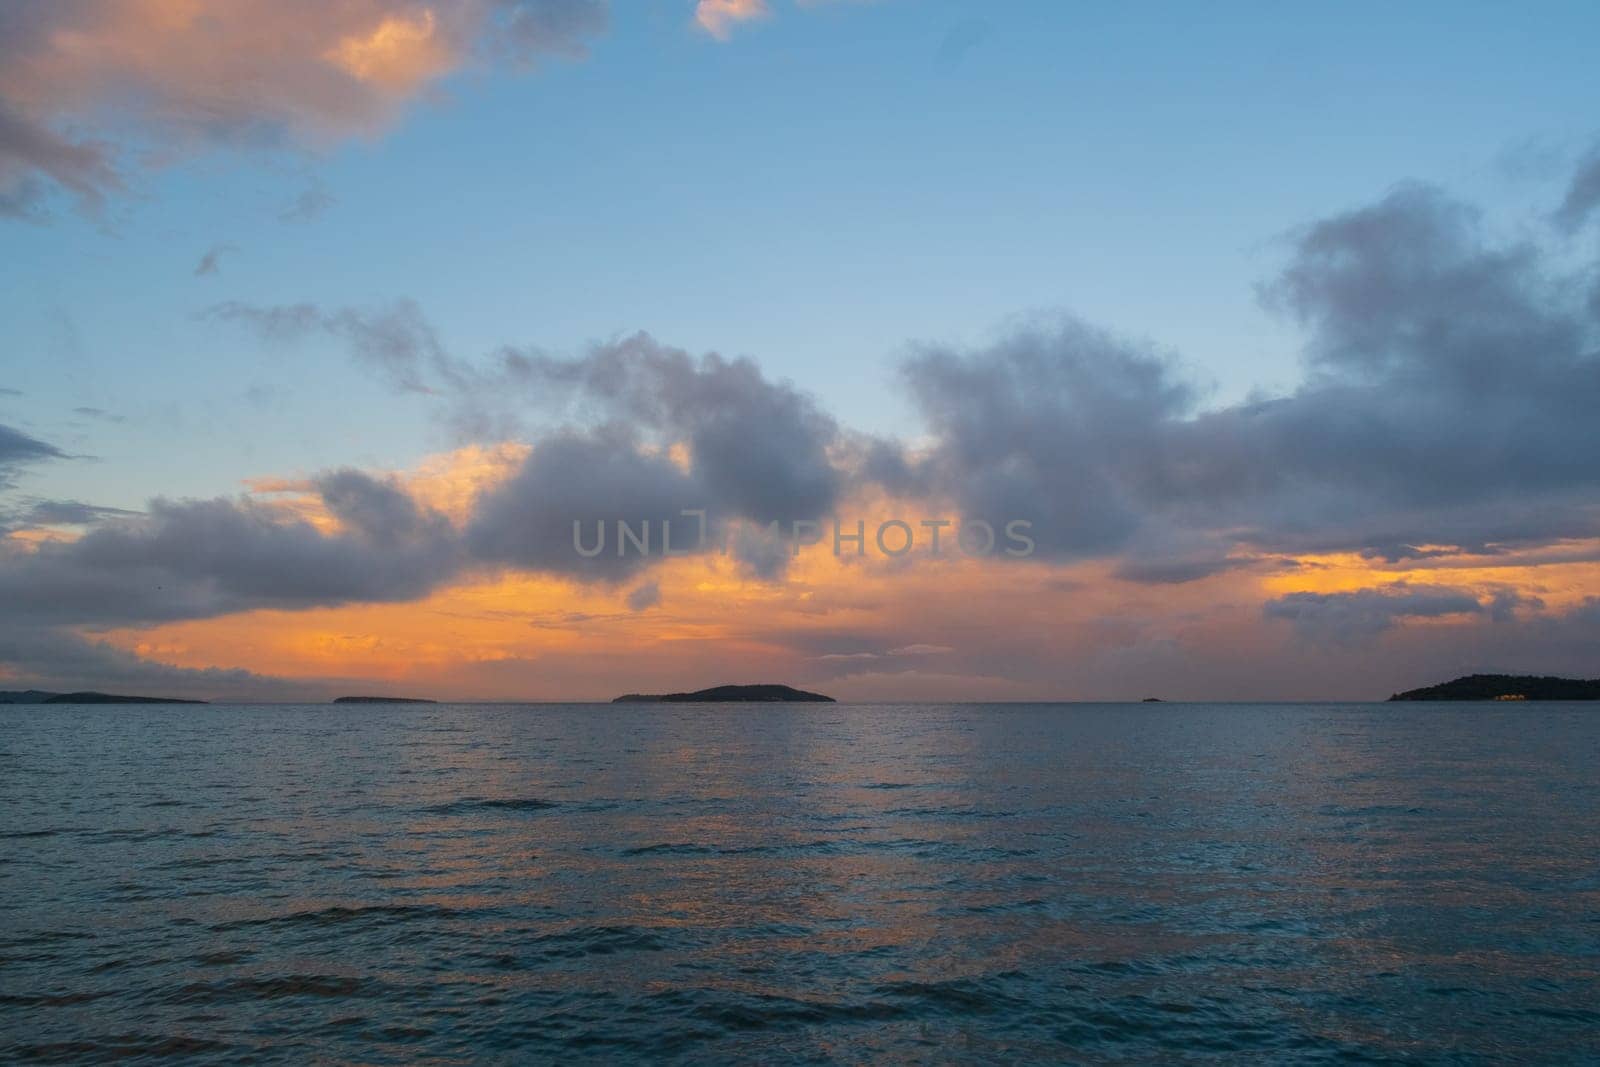 Blurred image of sunset over water, with cloudy sky and afterglow by senkaya